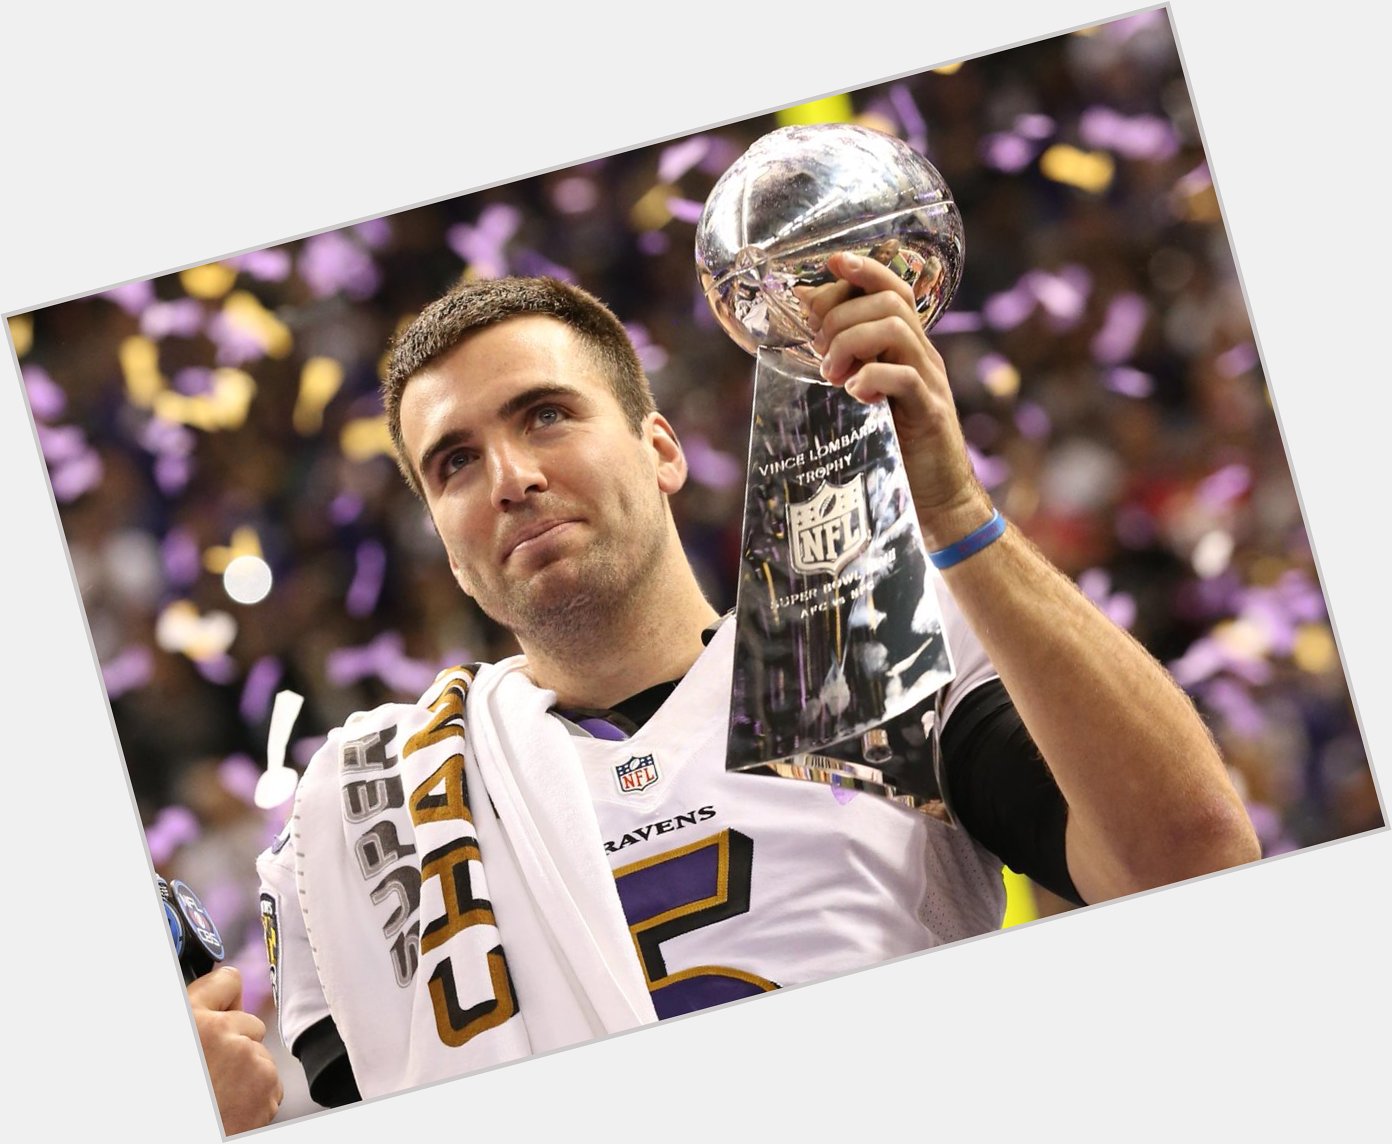 Happy 30th birthday to the one and only Joe Flacco! Congratulations 